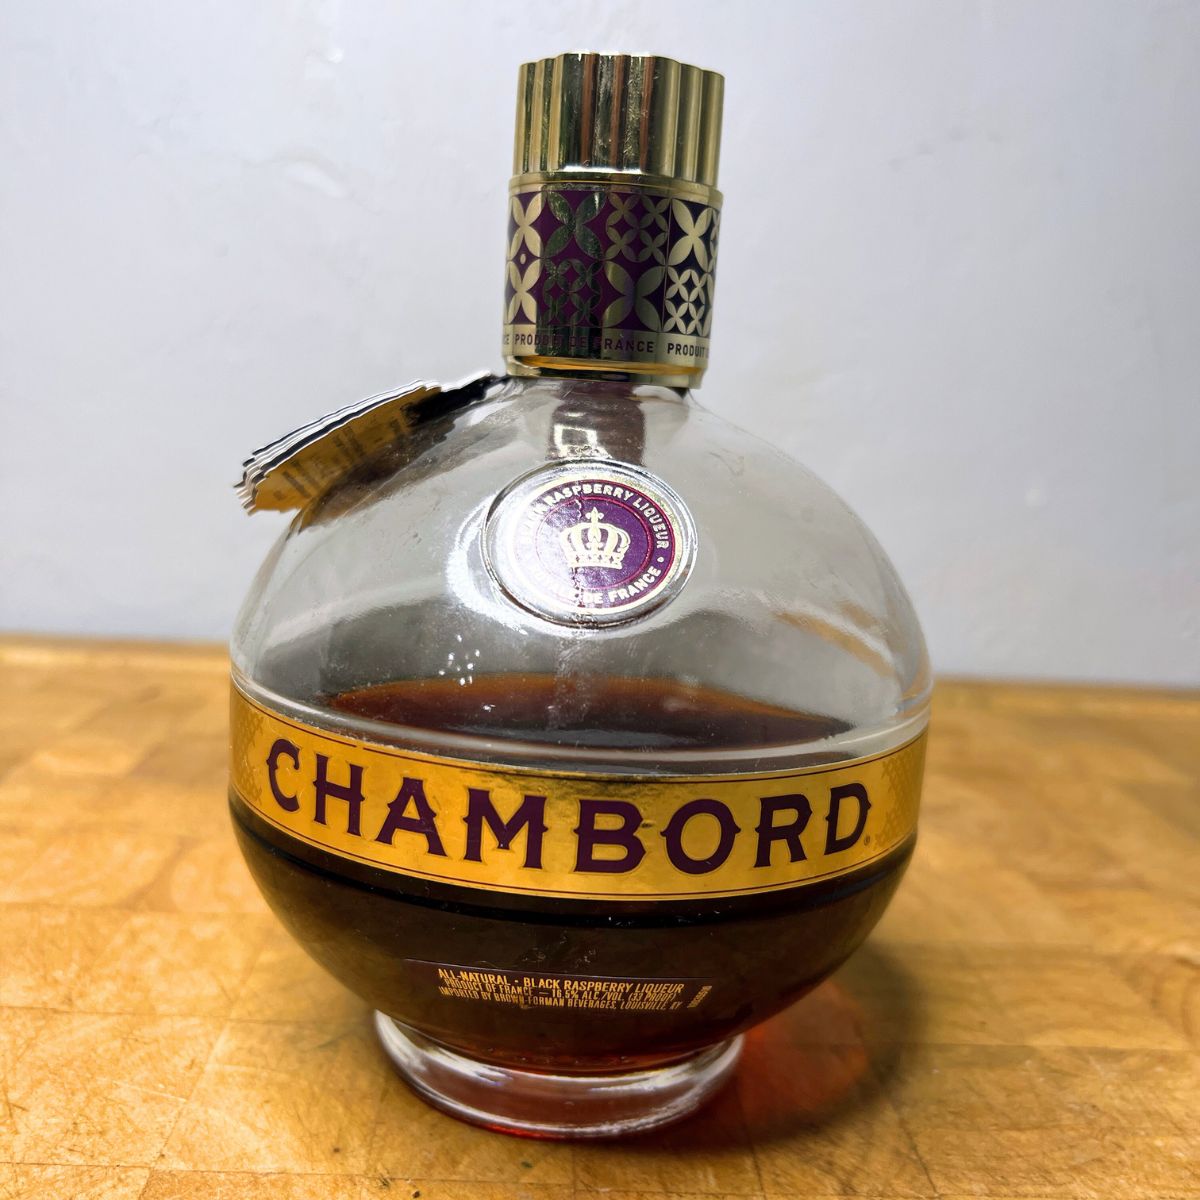 Bottle of Chambord on a table.